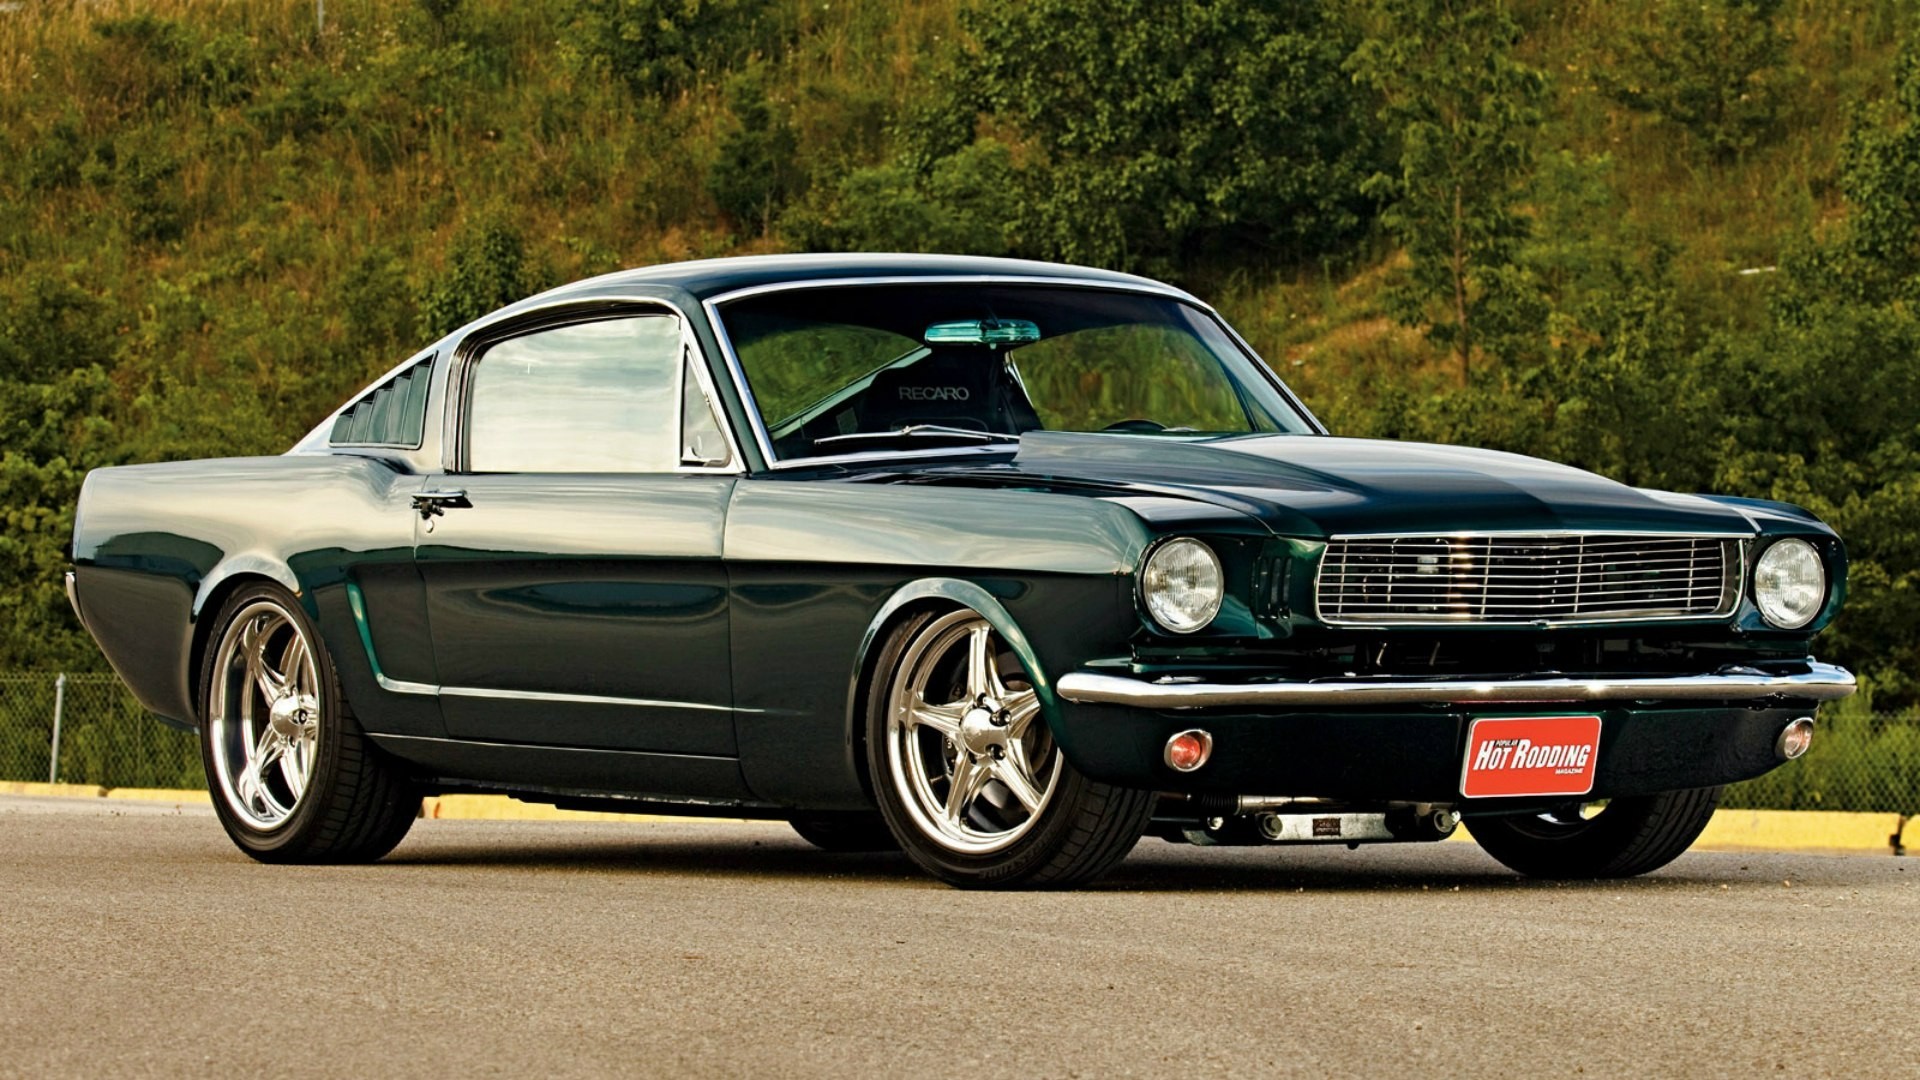 General 1920x1080 muscle cars Ford Mustang Ford car vehicle black cars American cars